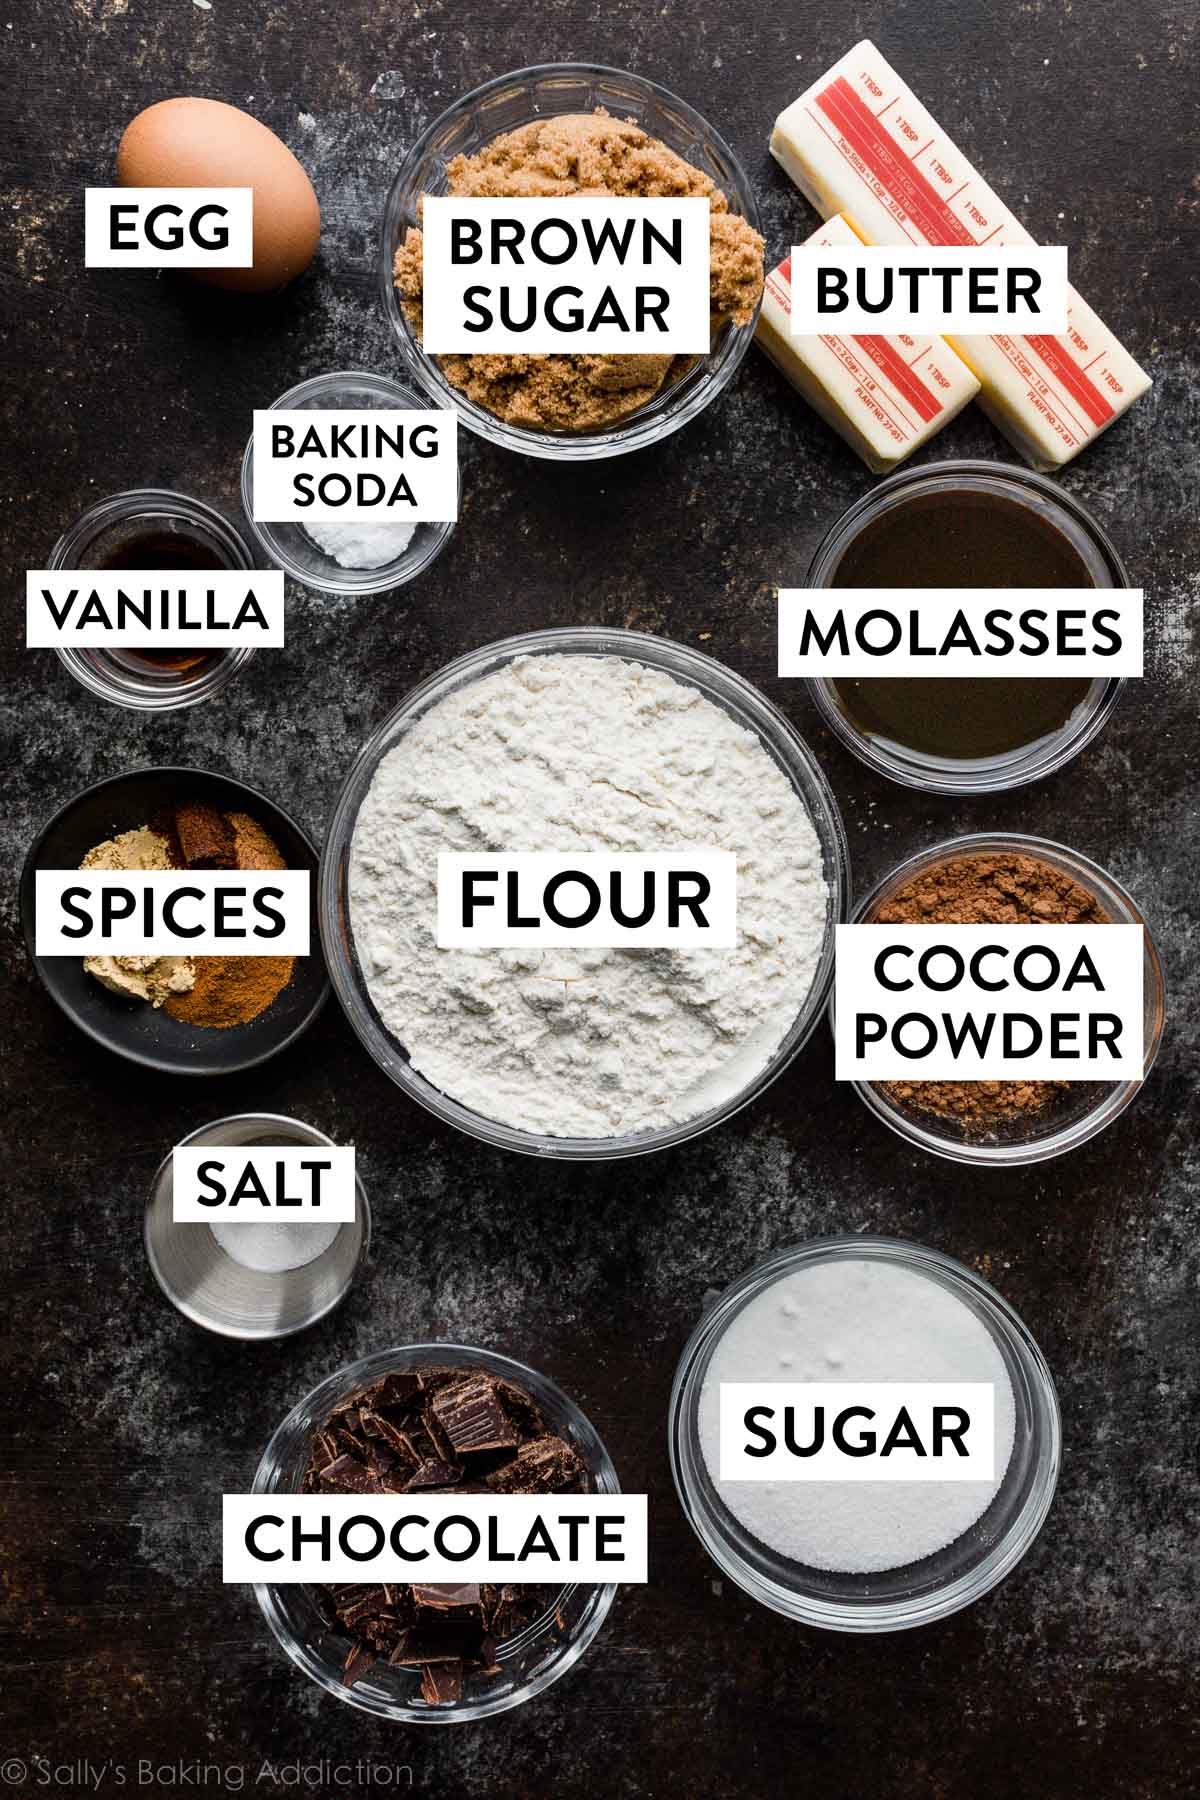 ingredients on black gray countertop including bowls of flour, cocoa powder, sugar, chocolate, salt, spiced, vanilla, brown sugar, and molasses.